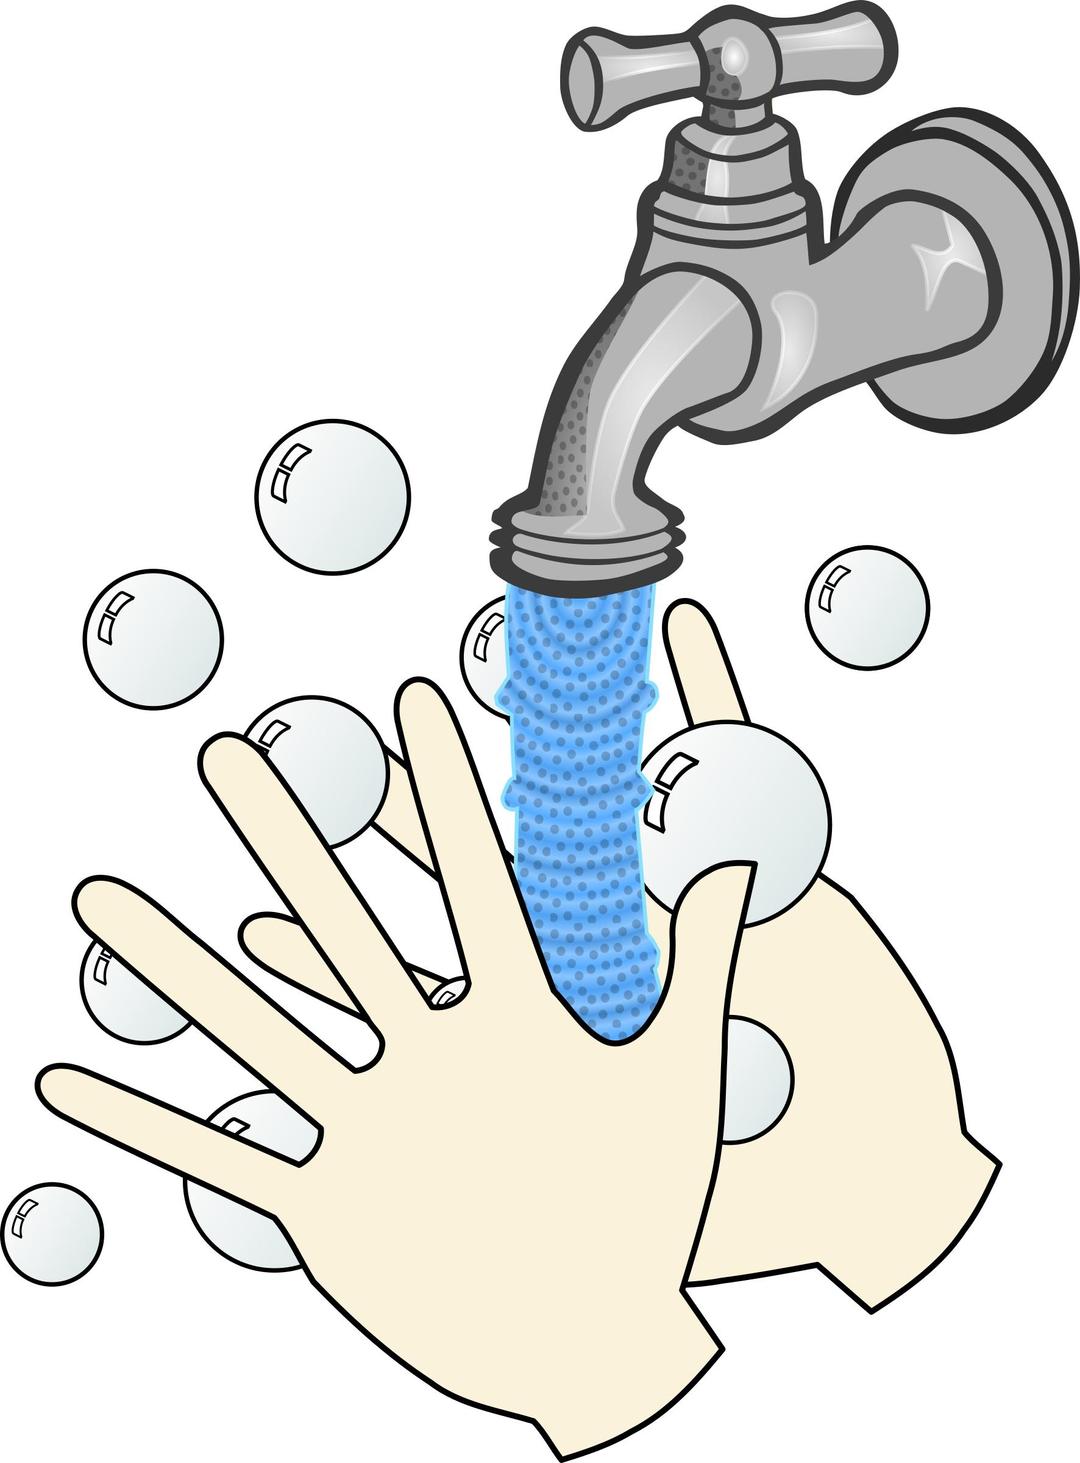 washing hands with soap and running water png transparent